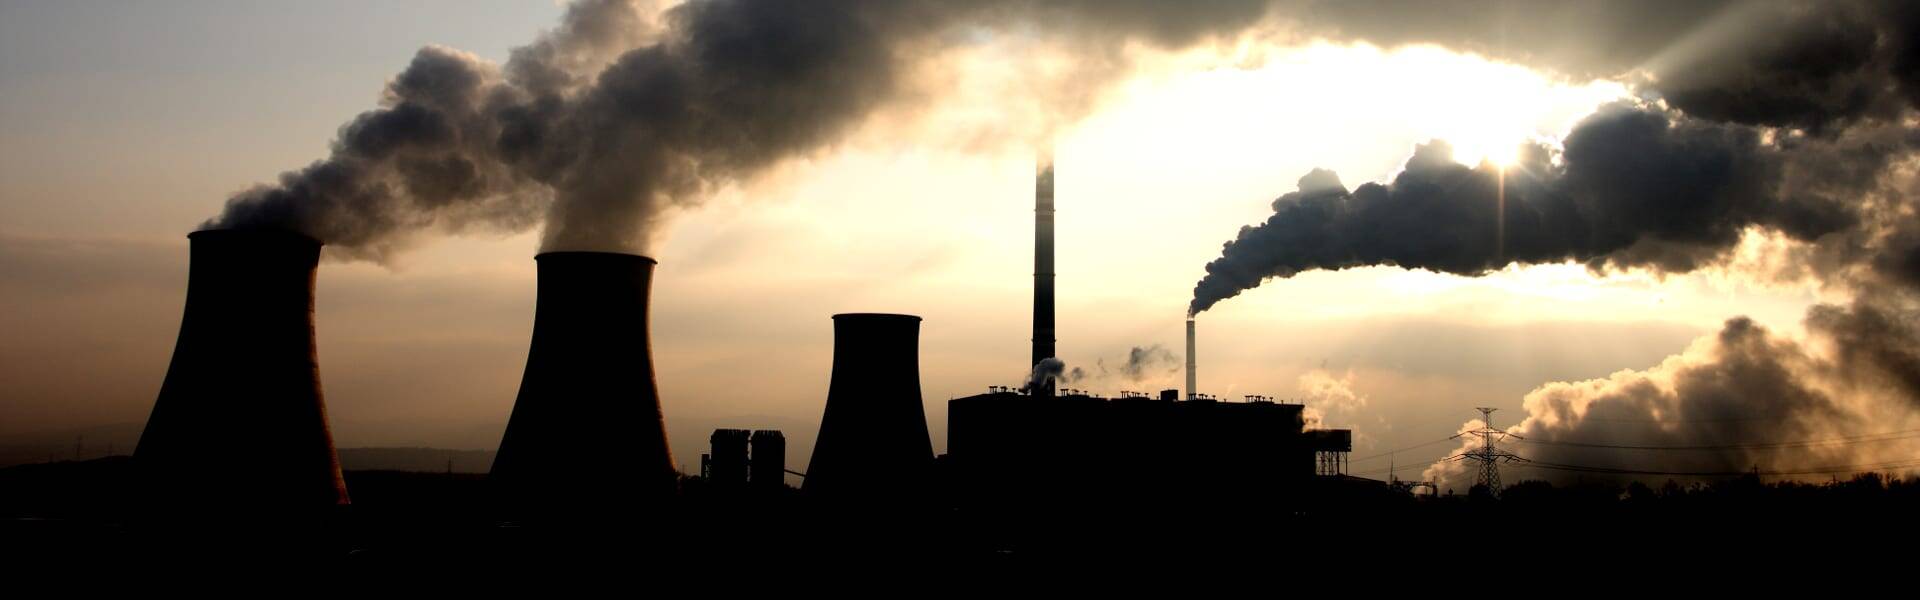 UK pressing ahead with plans for carbon price linked to EU ETS